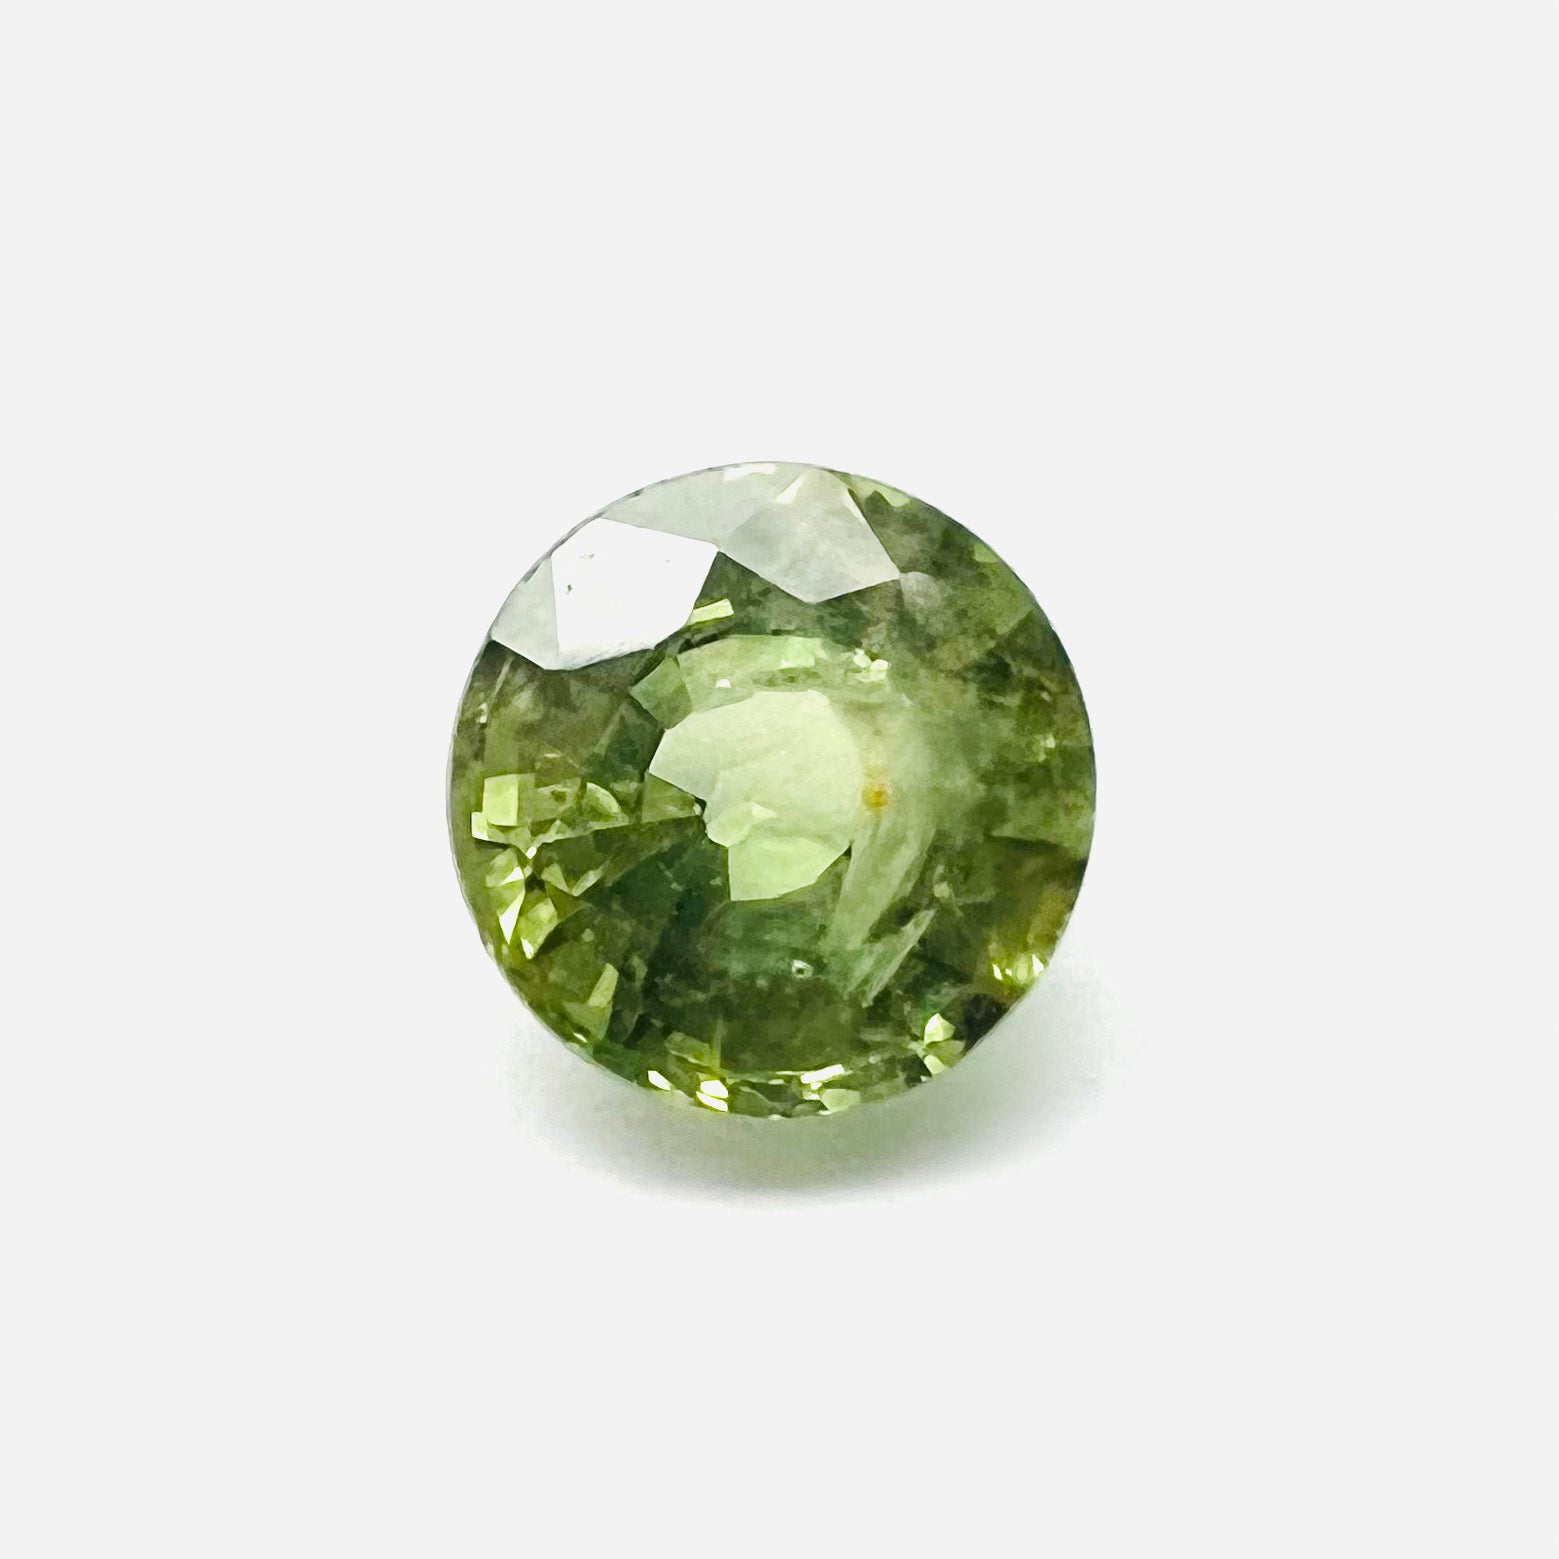 1CTW Loose Round Green Sapphire 5.53x3.98mm Earth mined Gemstone